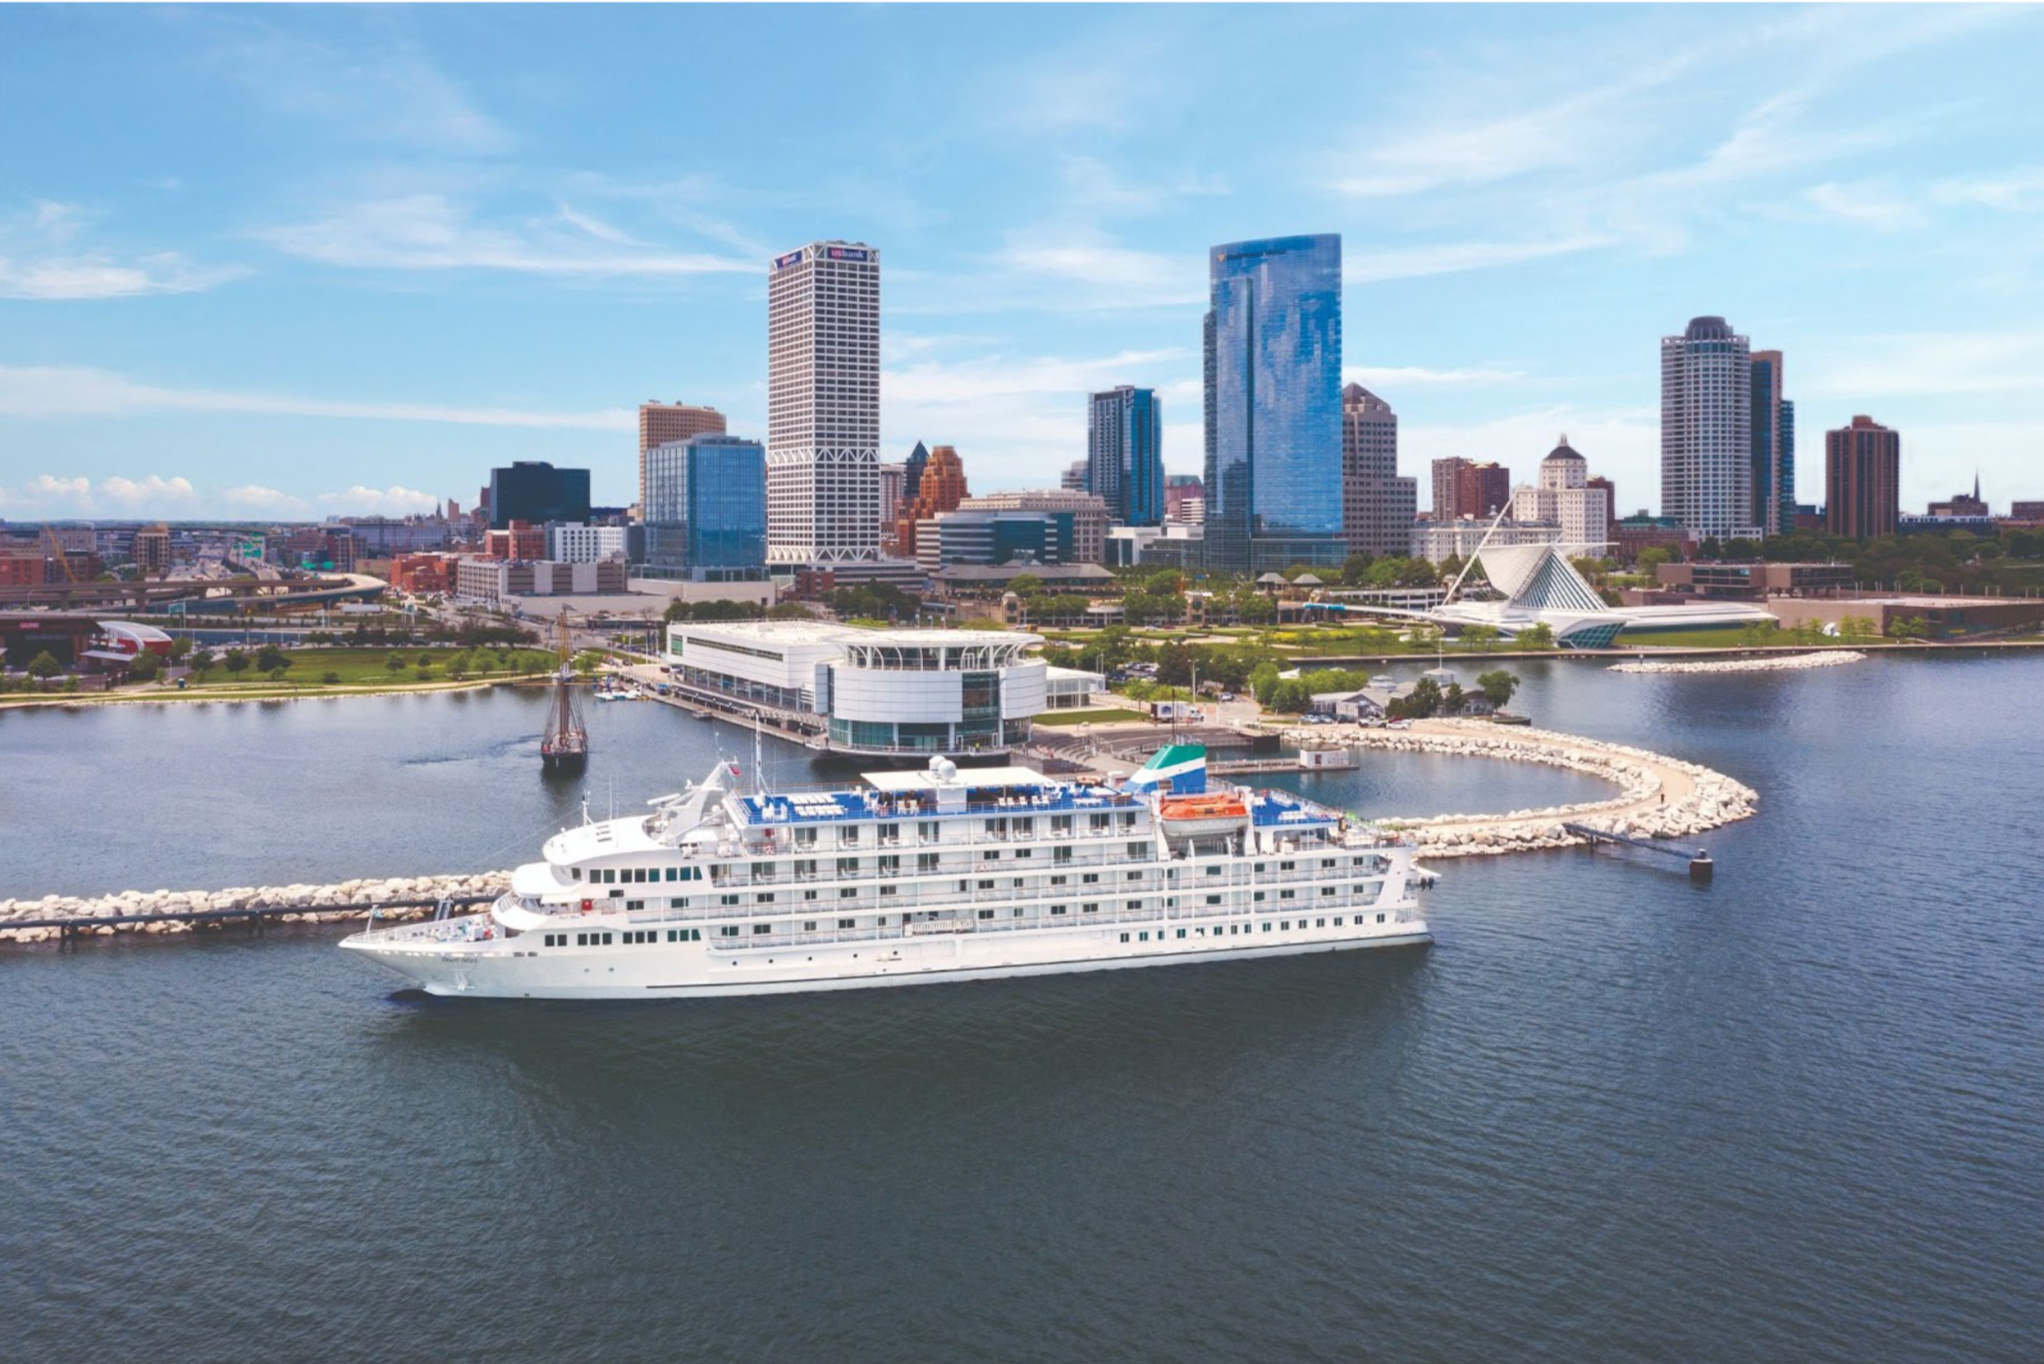 Cruise ships return to the Great Lakes Great Lakes Echo